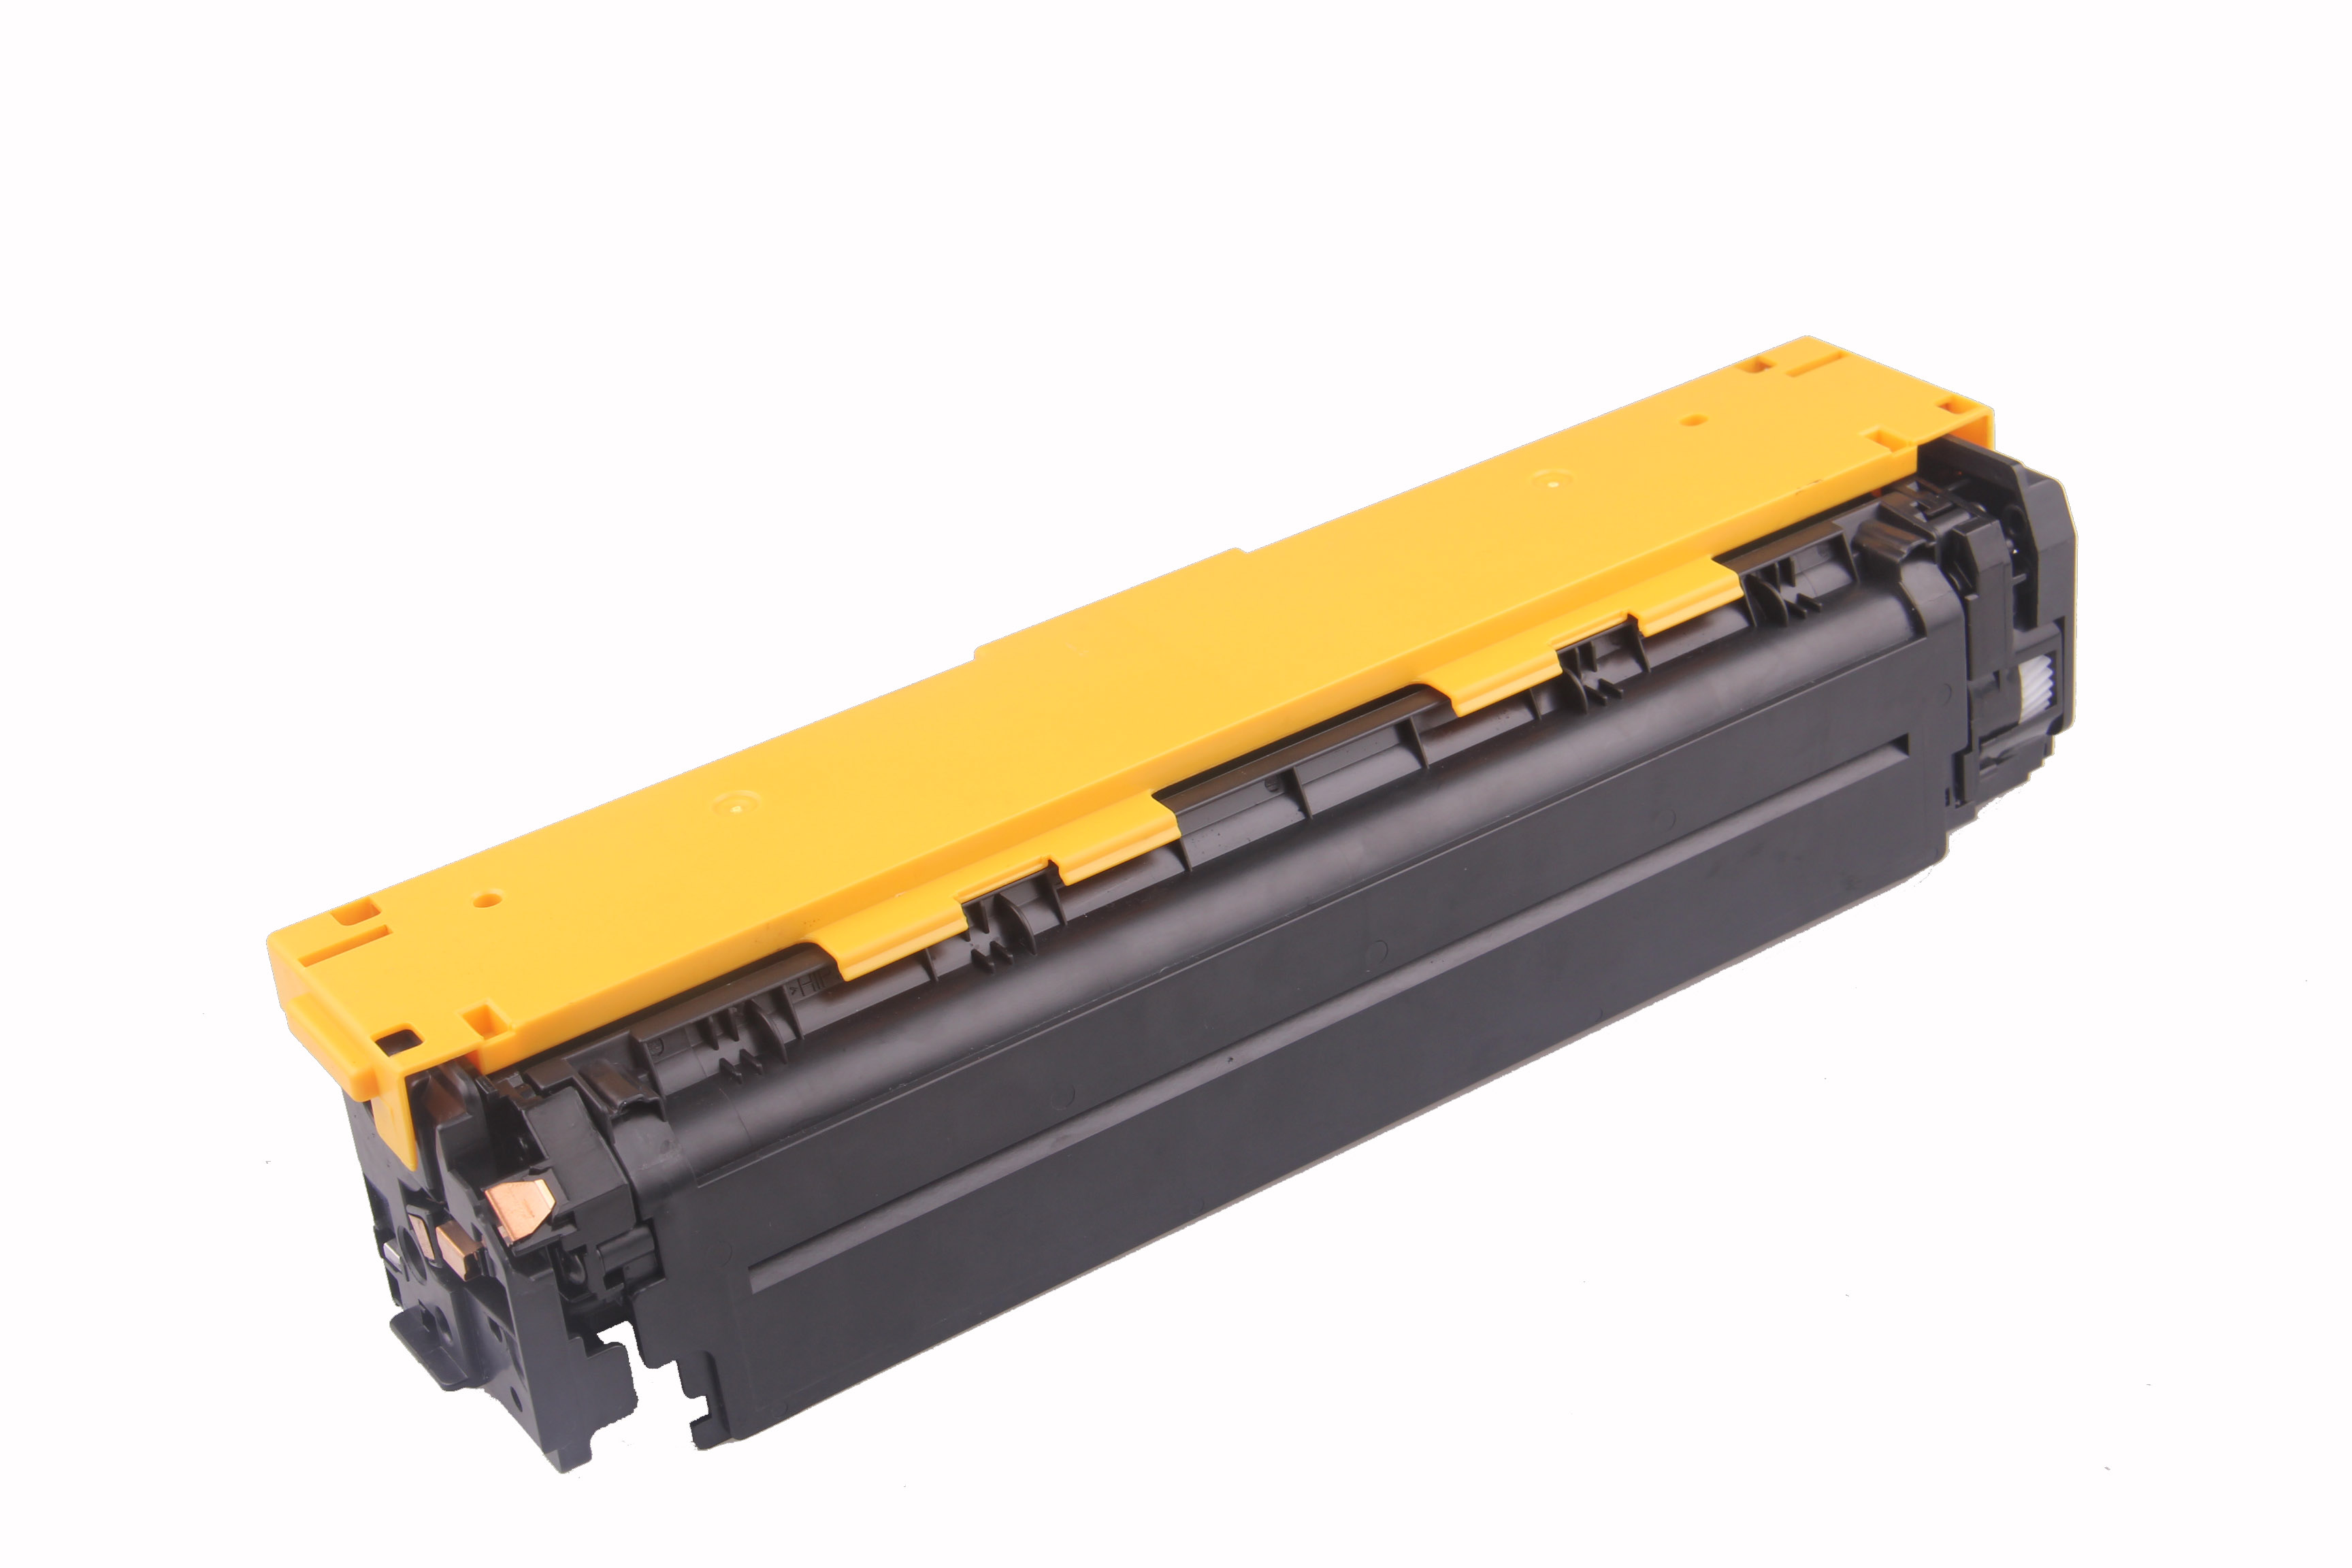 TonerCare-CArtridge+Comp+HP+Laserjet+Pro+200+M276+Yellow+Toner+CF212A+also+for+Canon+731Y